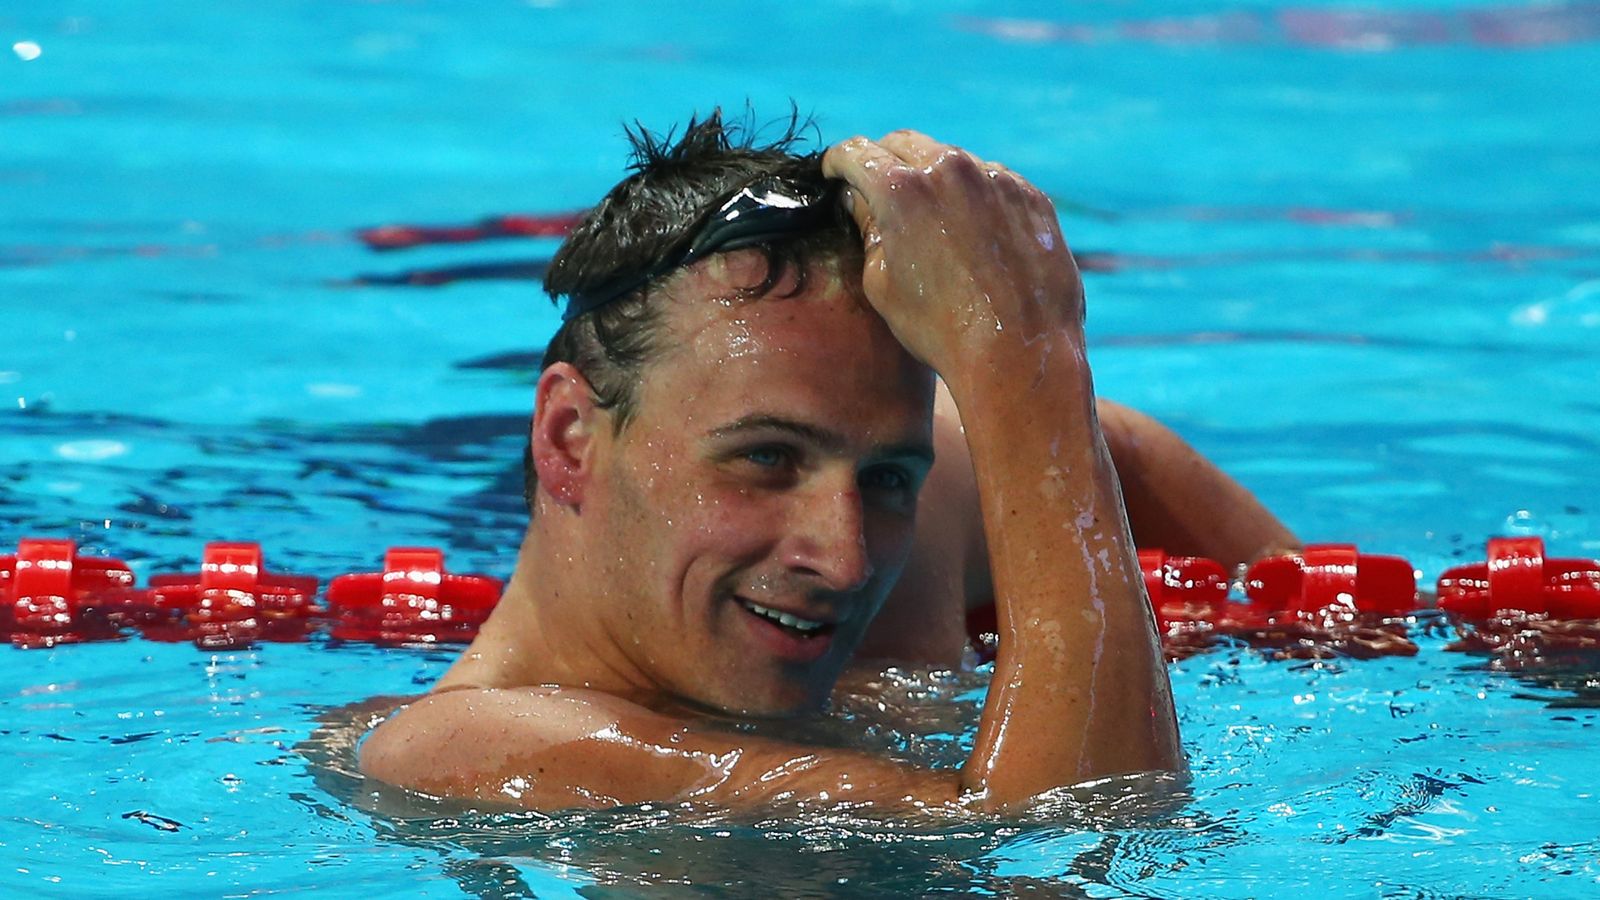 Rio Olympics Usa Swimming Gold Medallist Ryan Lochte Robbed By Armed